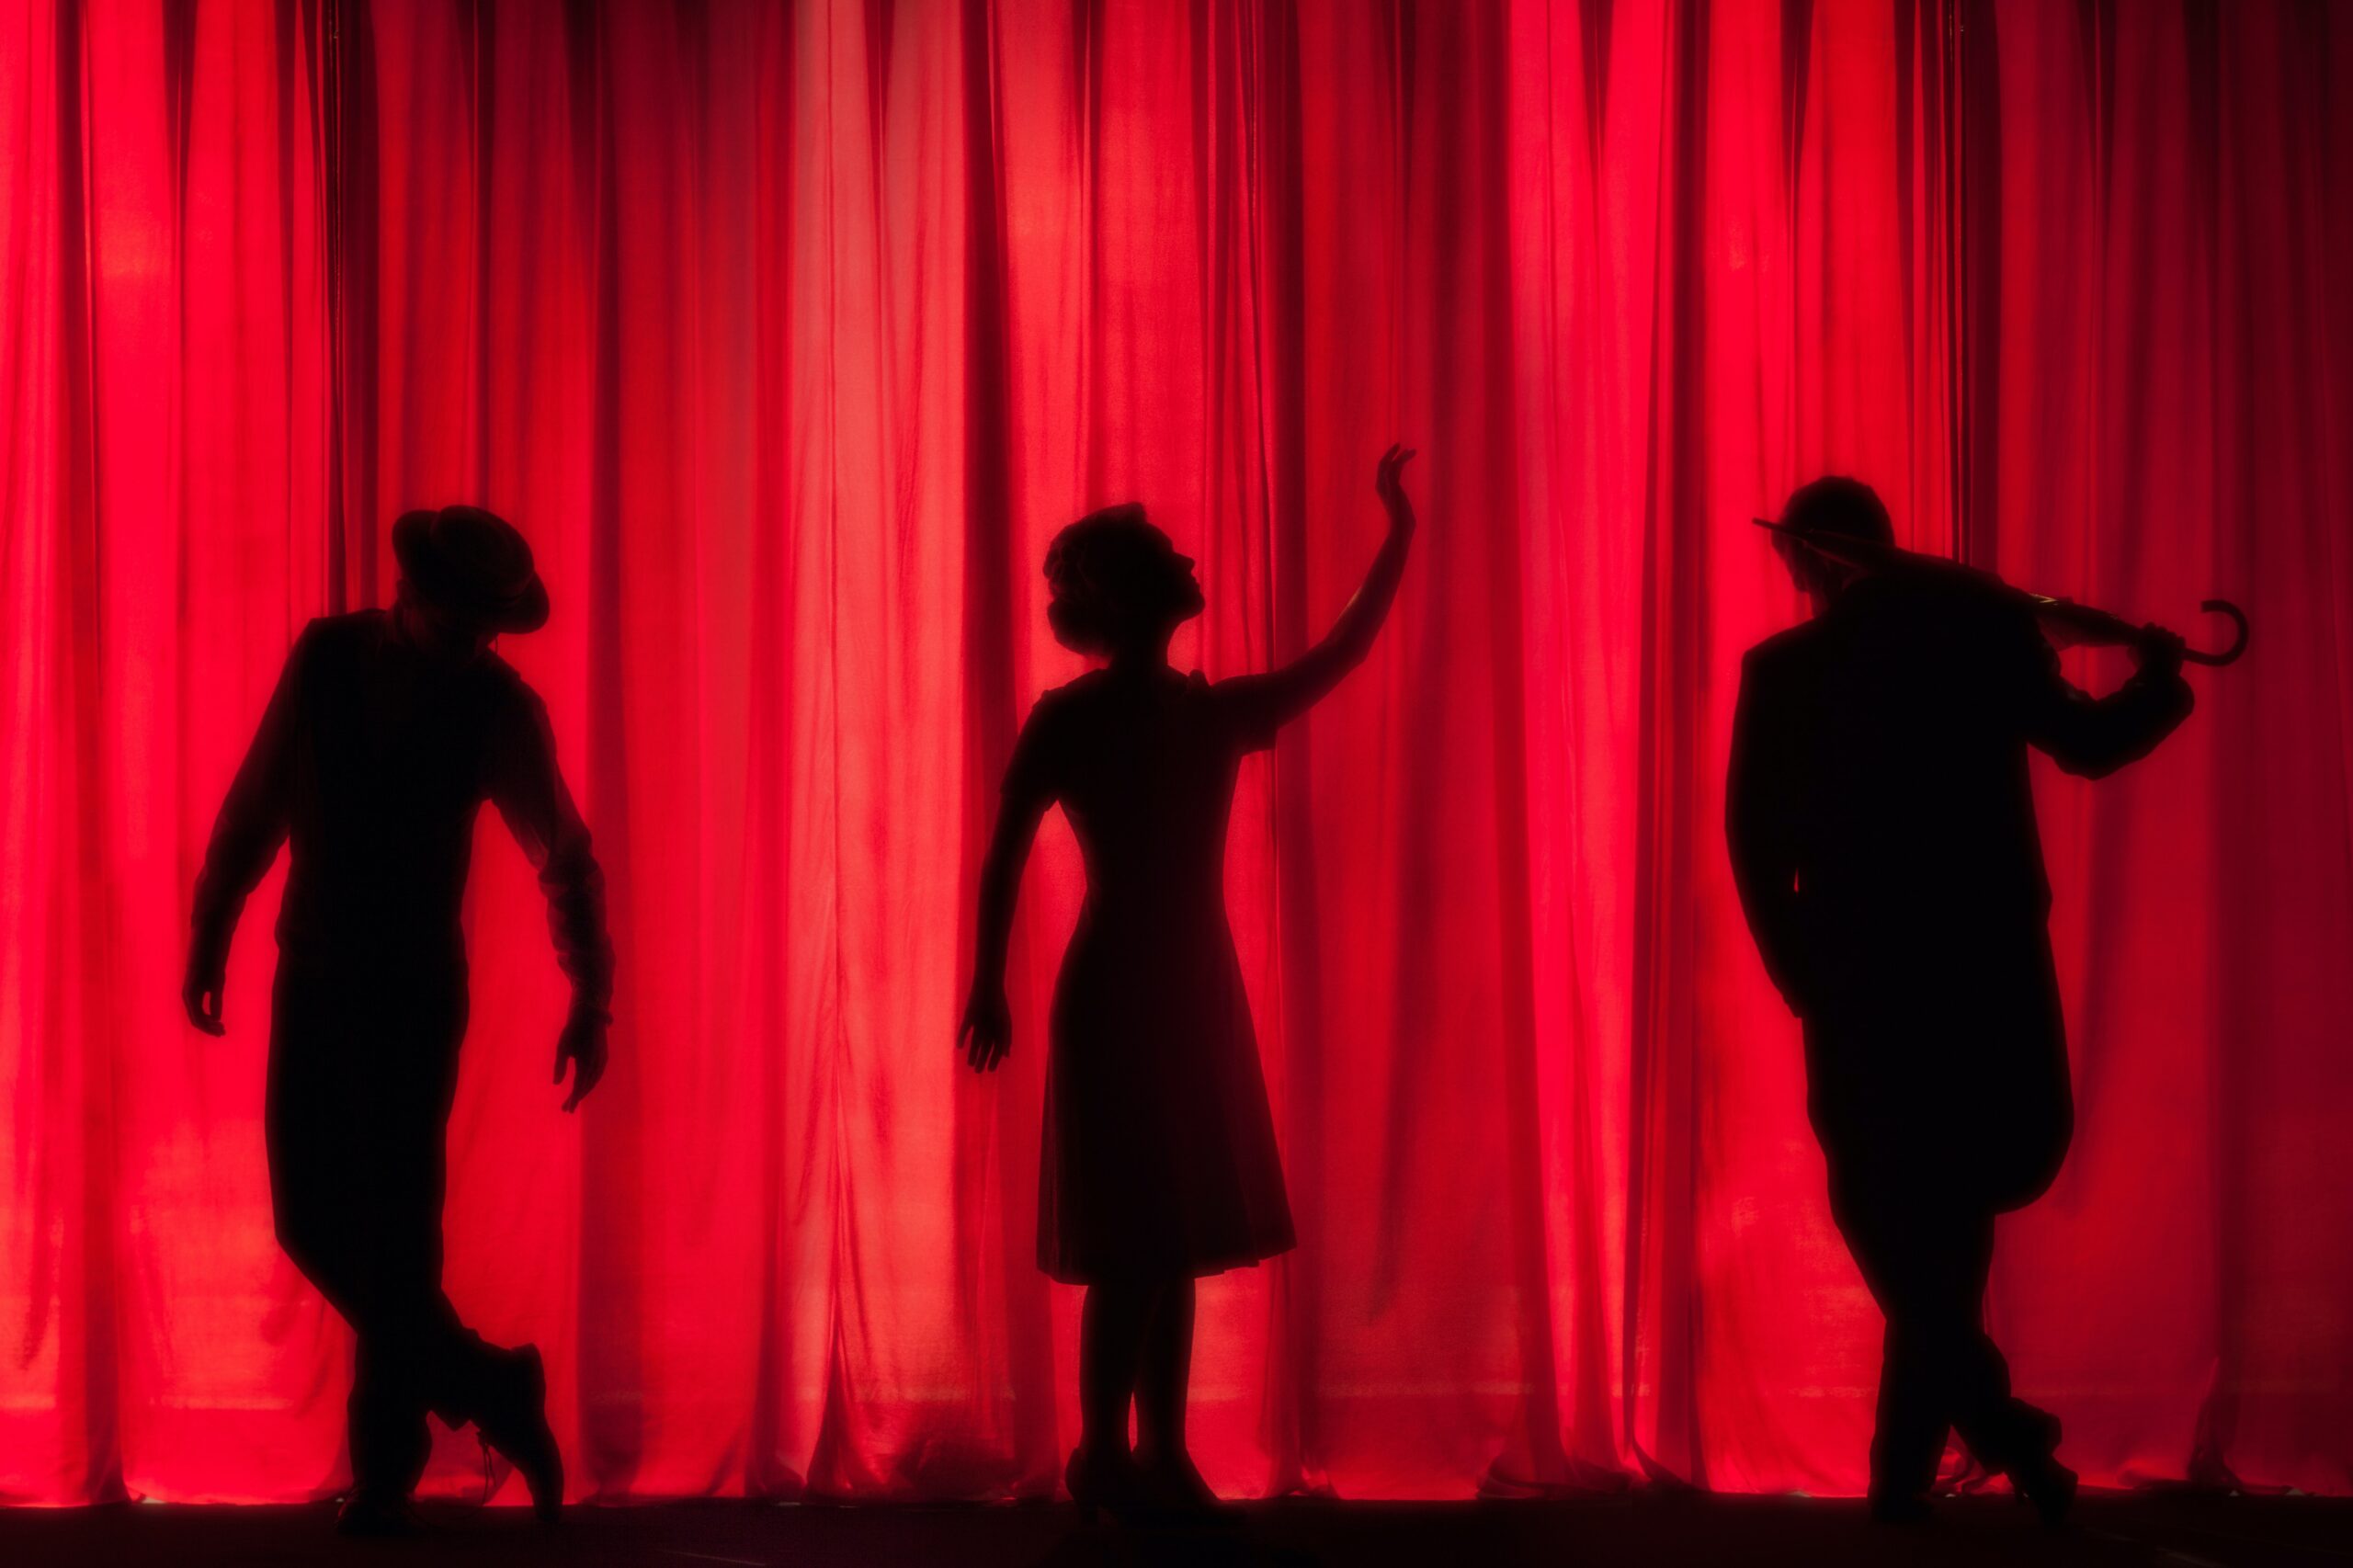 silhouettes on stage with red curtain